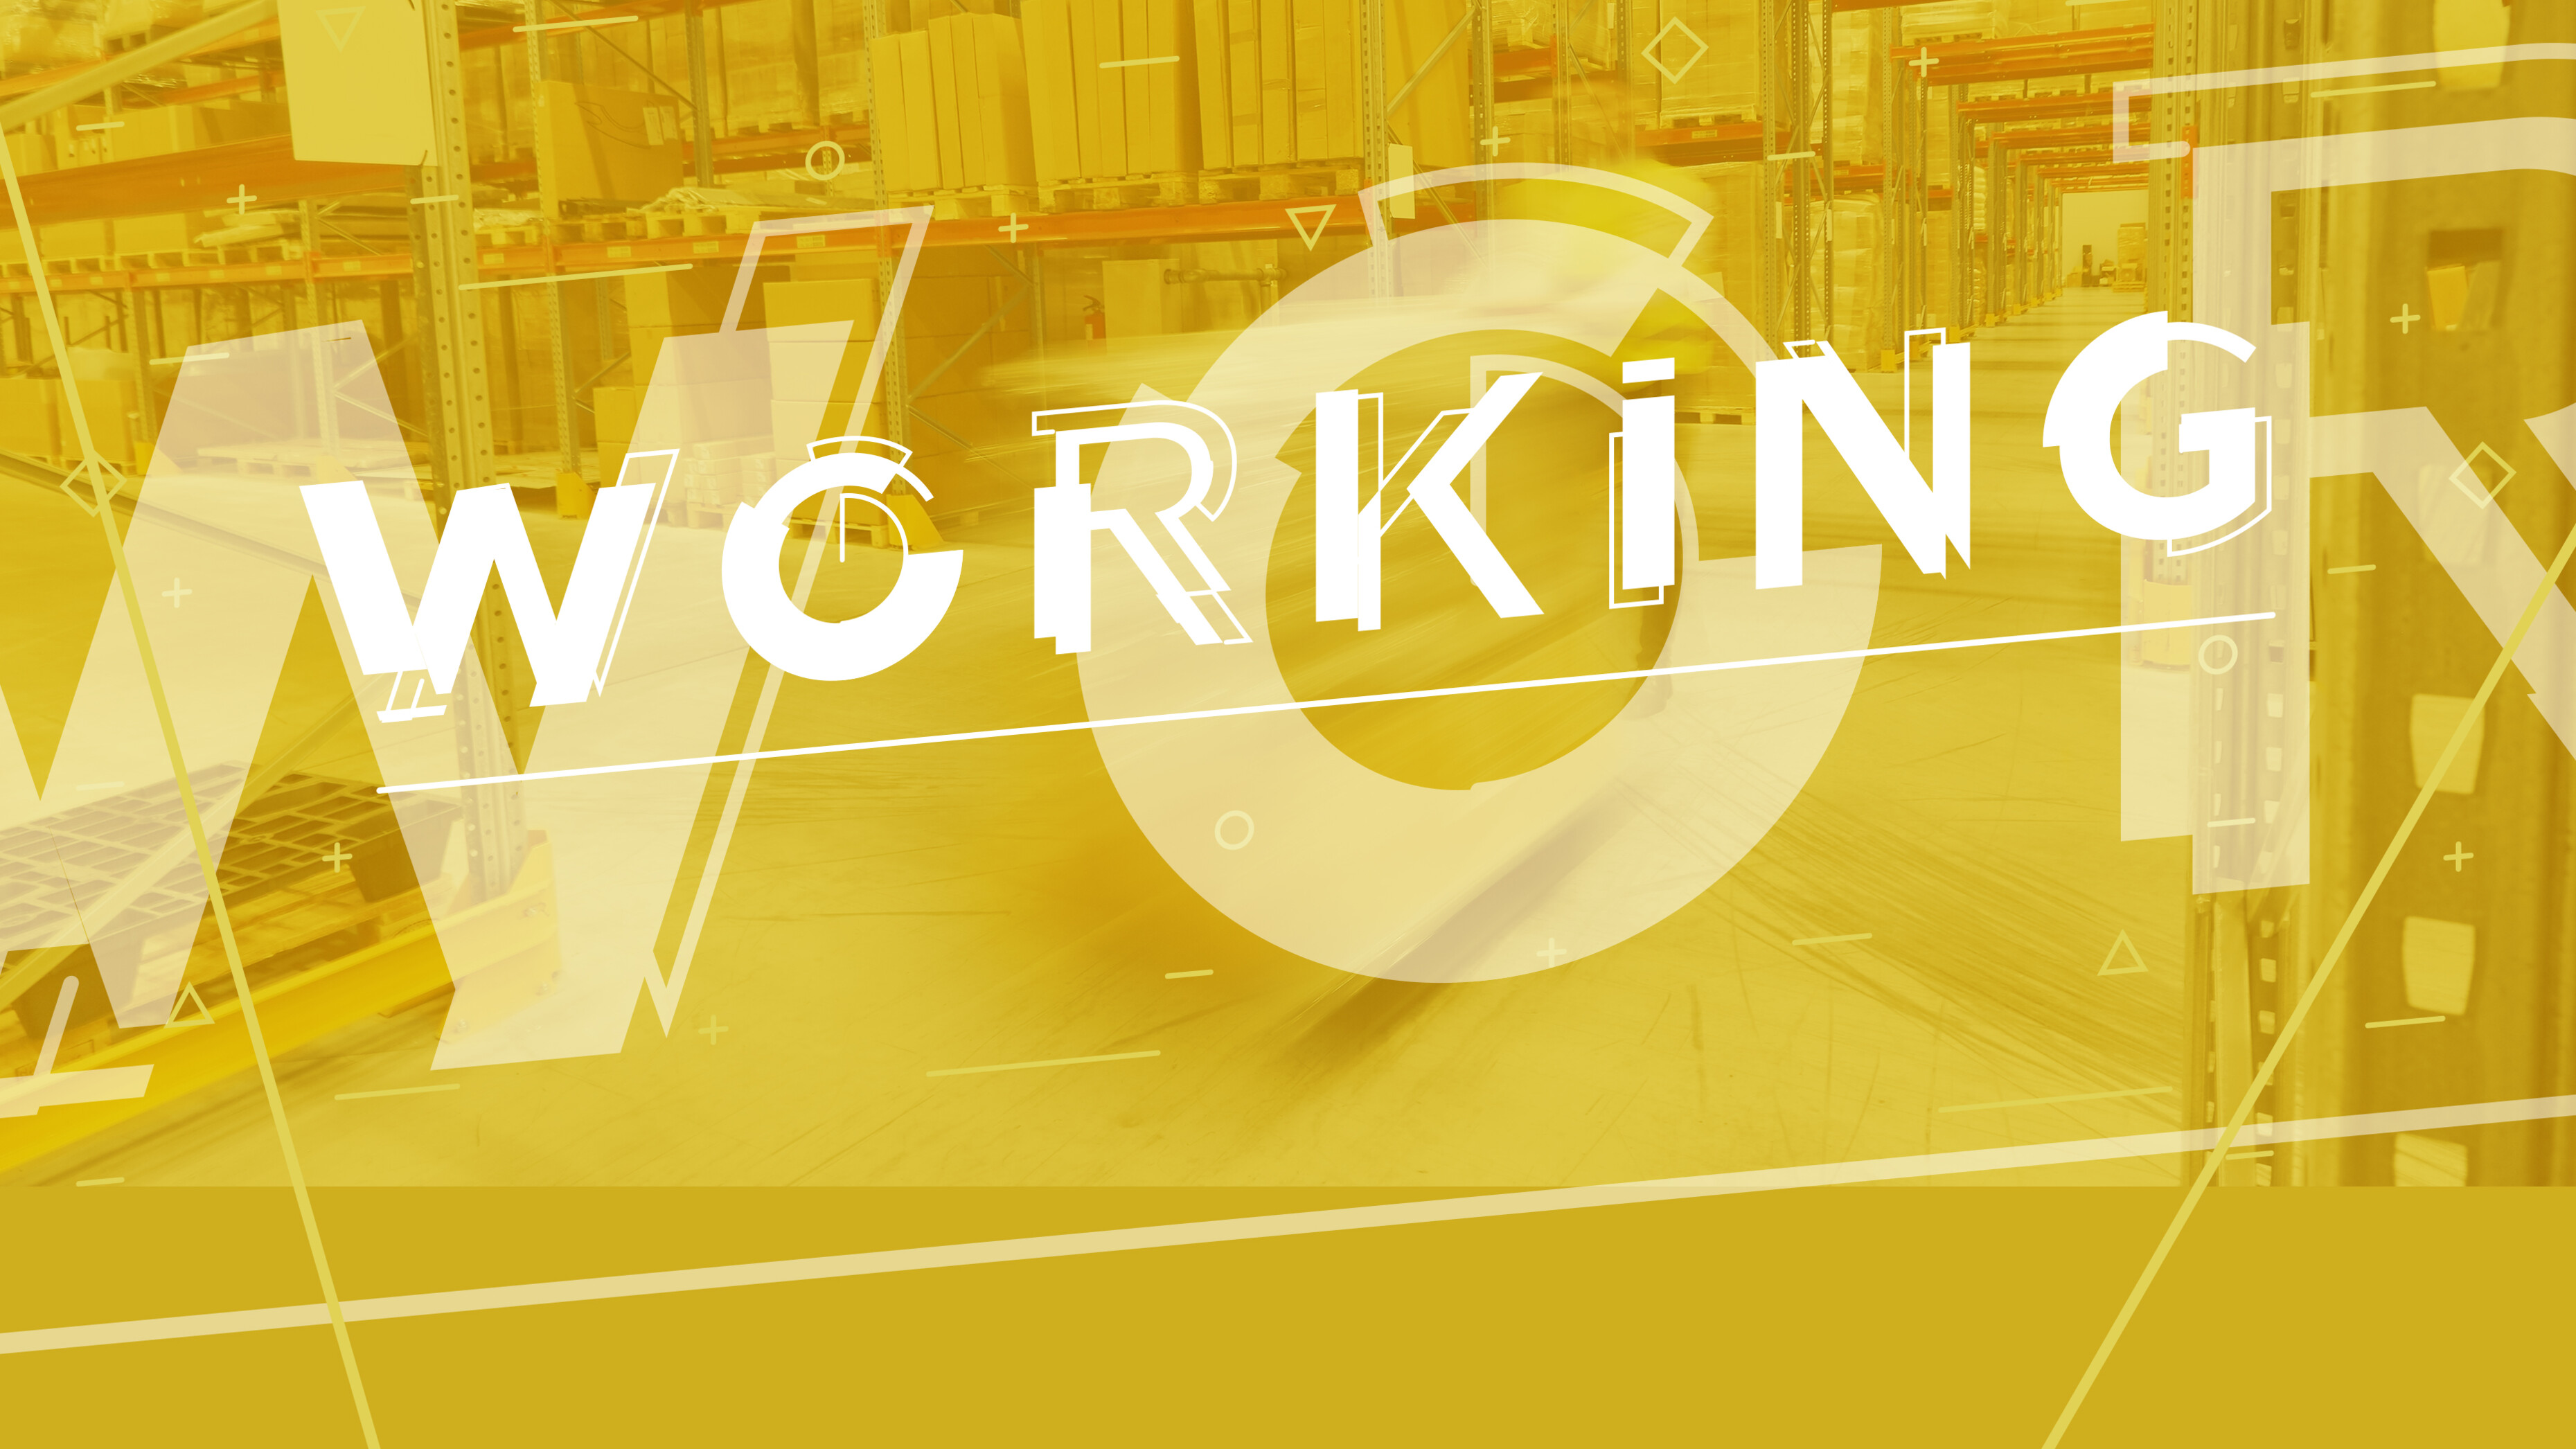 The word Working over a brass background showing an industrial setting